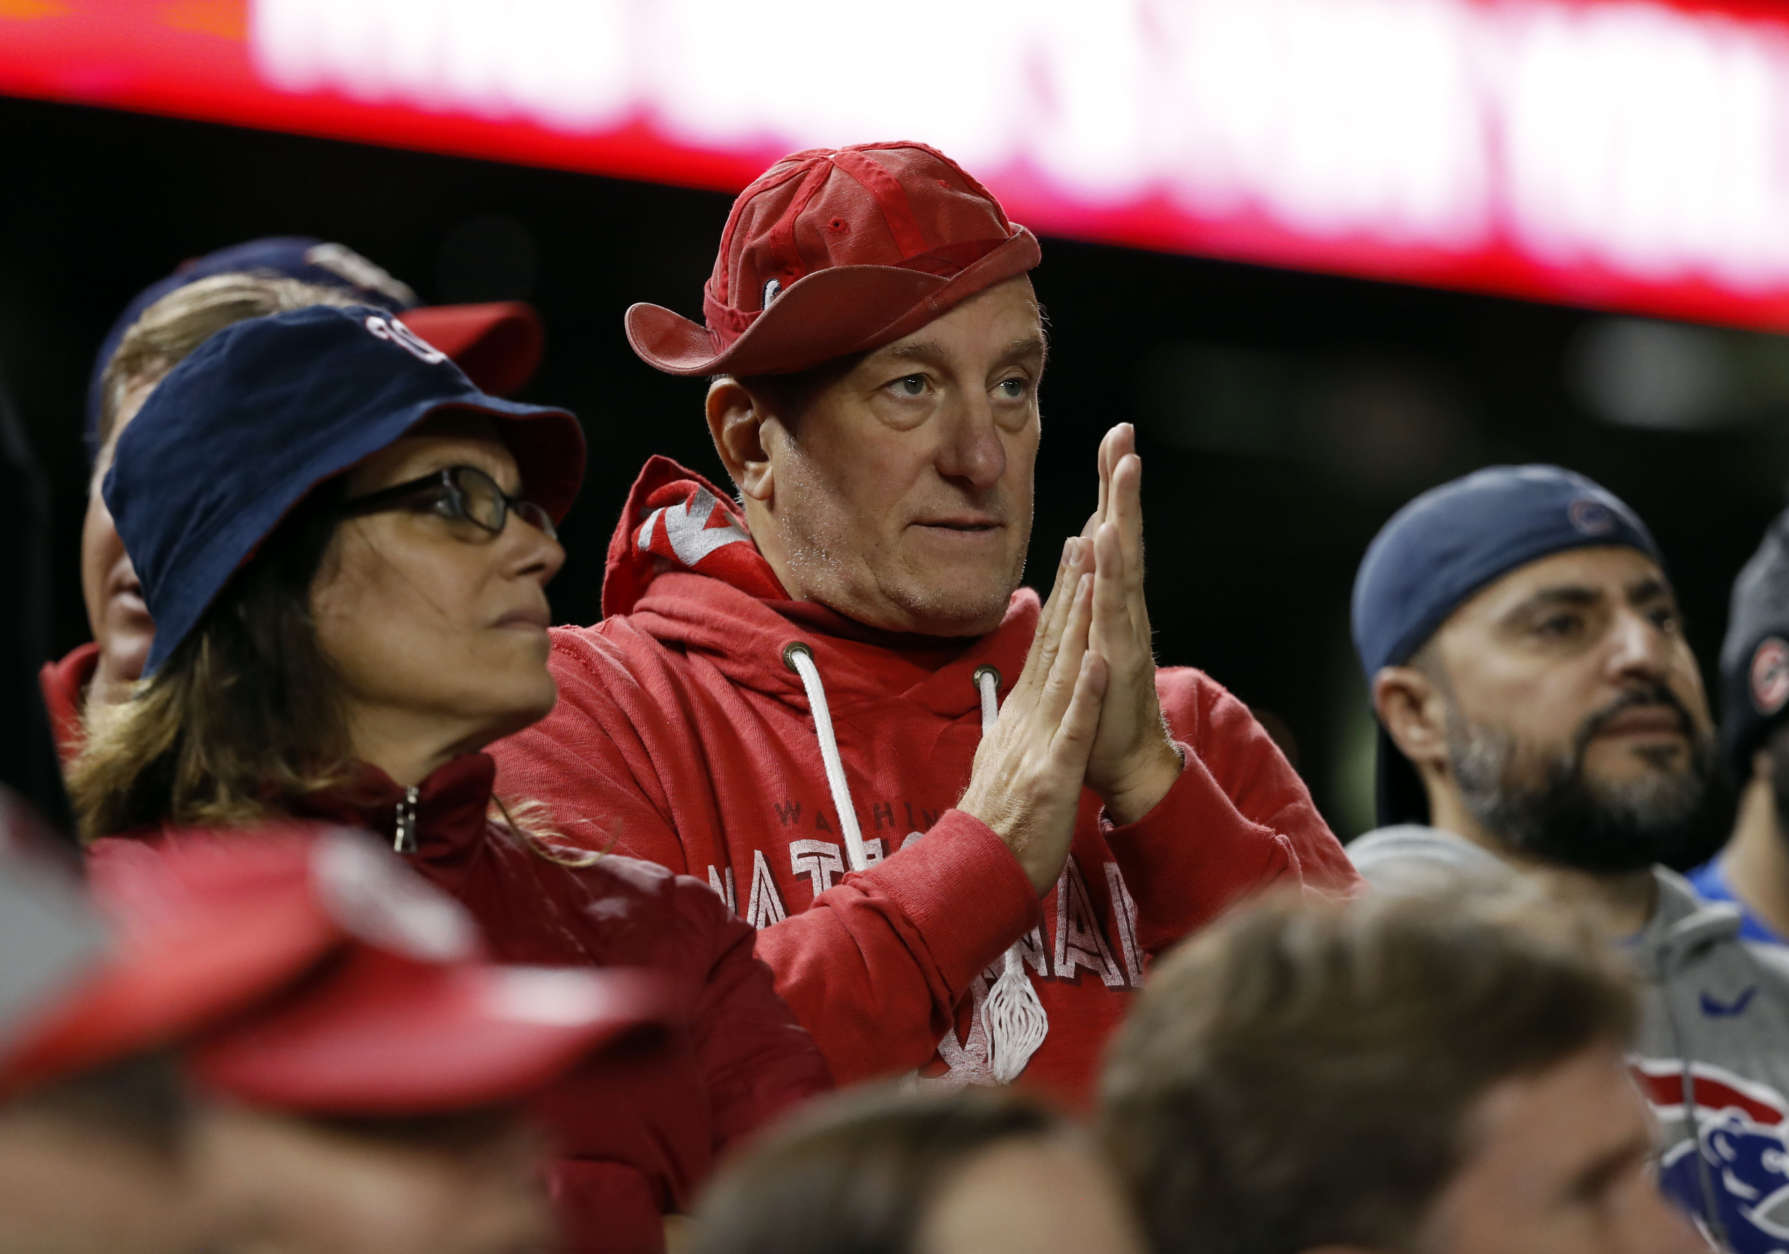 Washington Nationals fans watch the action during Game 5 of baseball's National League Division Series against the Chicago Cubs, at Nationals Park, Thursday, Oct. 12, 2017 in Washington. The Cubs won 9-8 and won the series. (AP Photo/Pablo Martinez Monsivais)